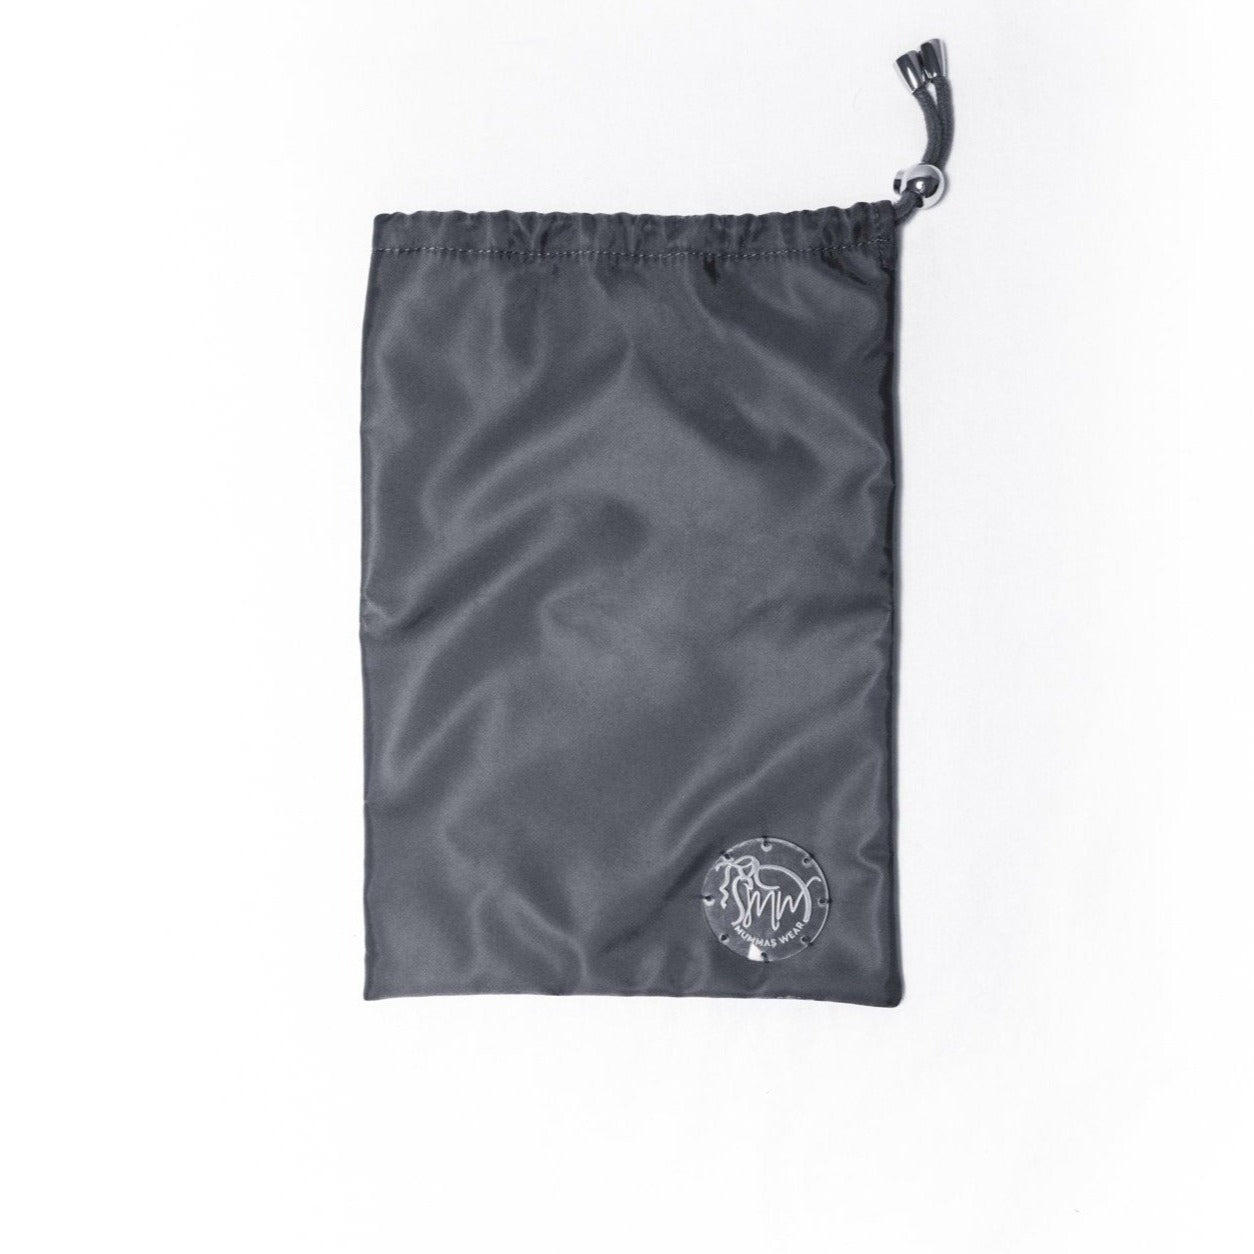 alt="Mummas Wear Oopsie Daisy Wet Bag with drawstring tie and silver metal toggle"